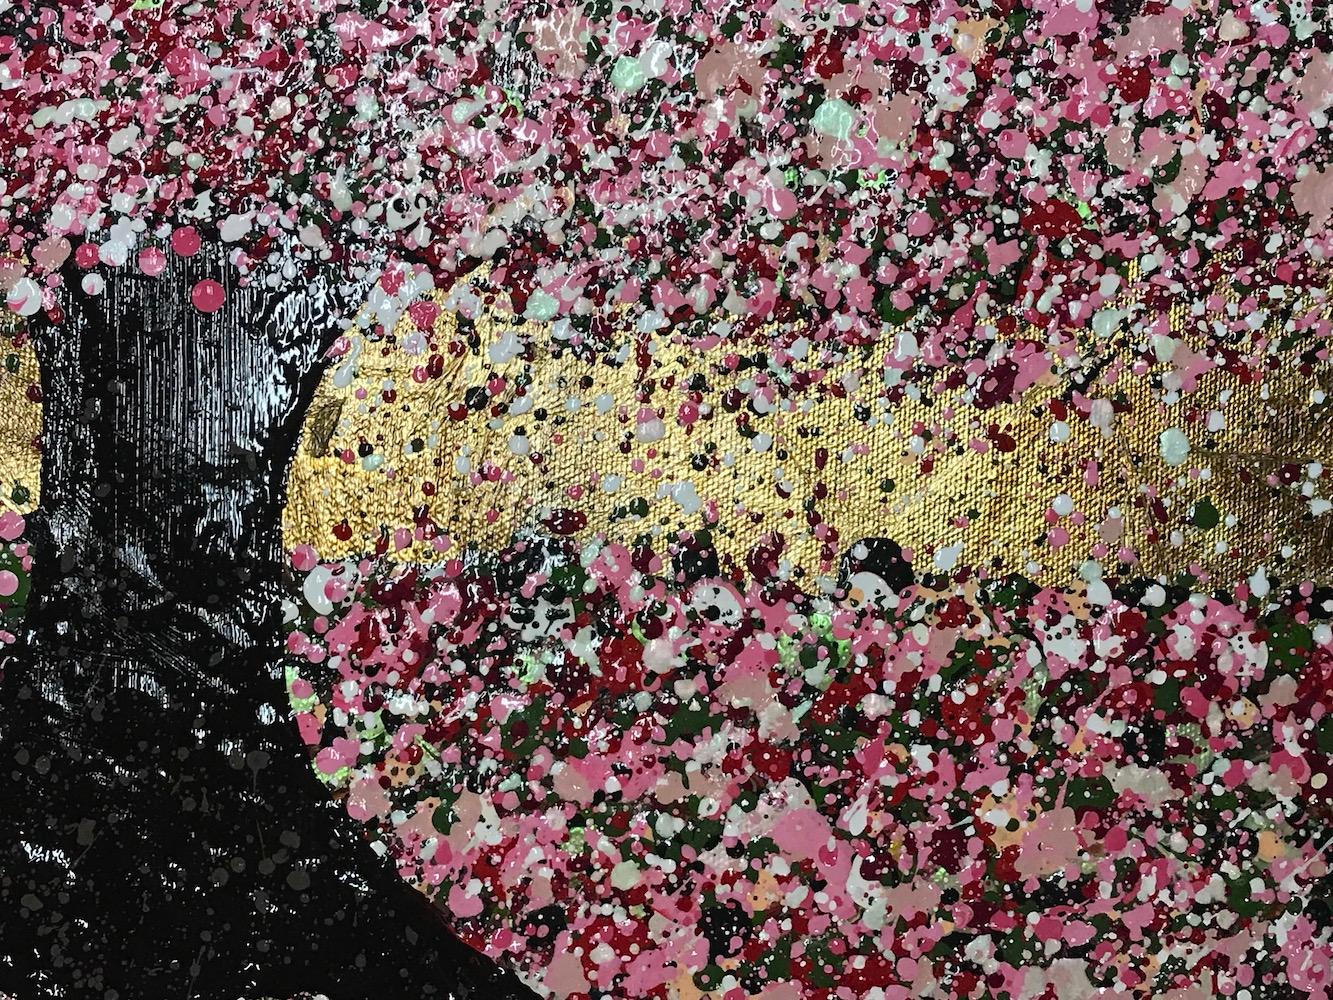 Tumbling Blossom on a Spring Evening by Nicky Chubb [2021]

original
Acrylic paint on canvas
Image size: H:76 cm x W:76 cm
Complete Size of Unframed Work: H:76 cm x W:76 cm x D:3.5cm
Sold Unframed
Please note that insitu images are purely an